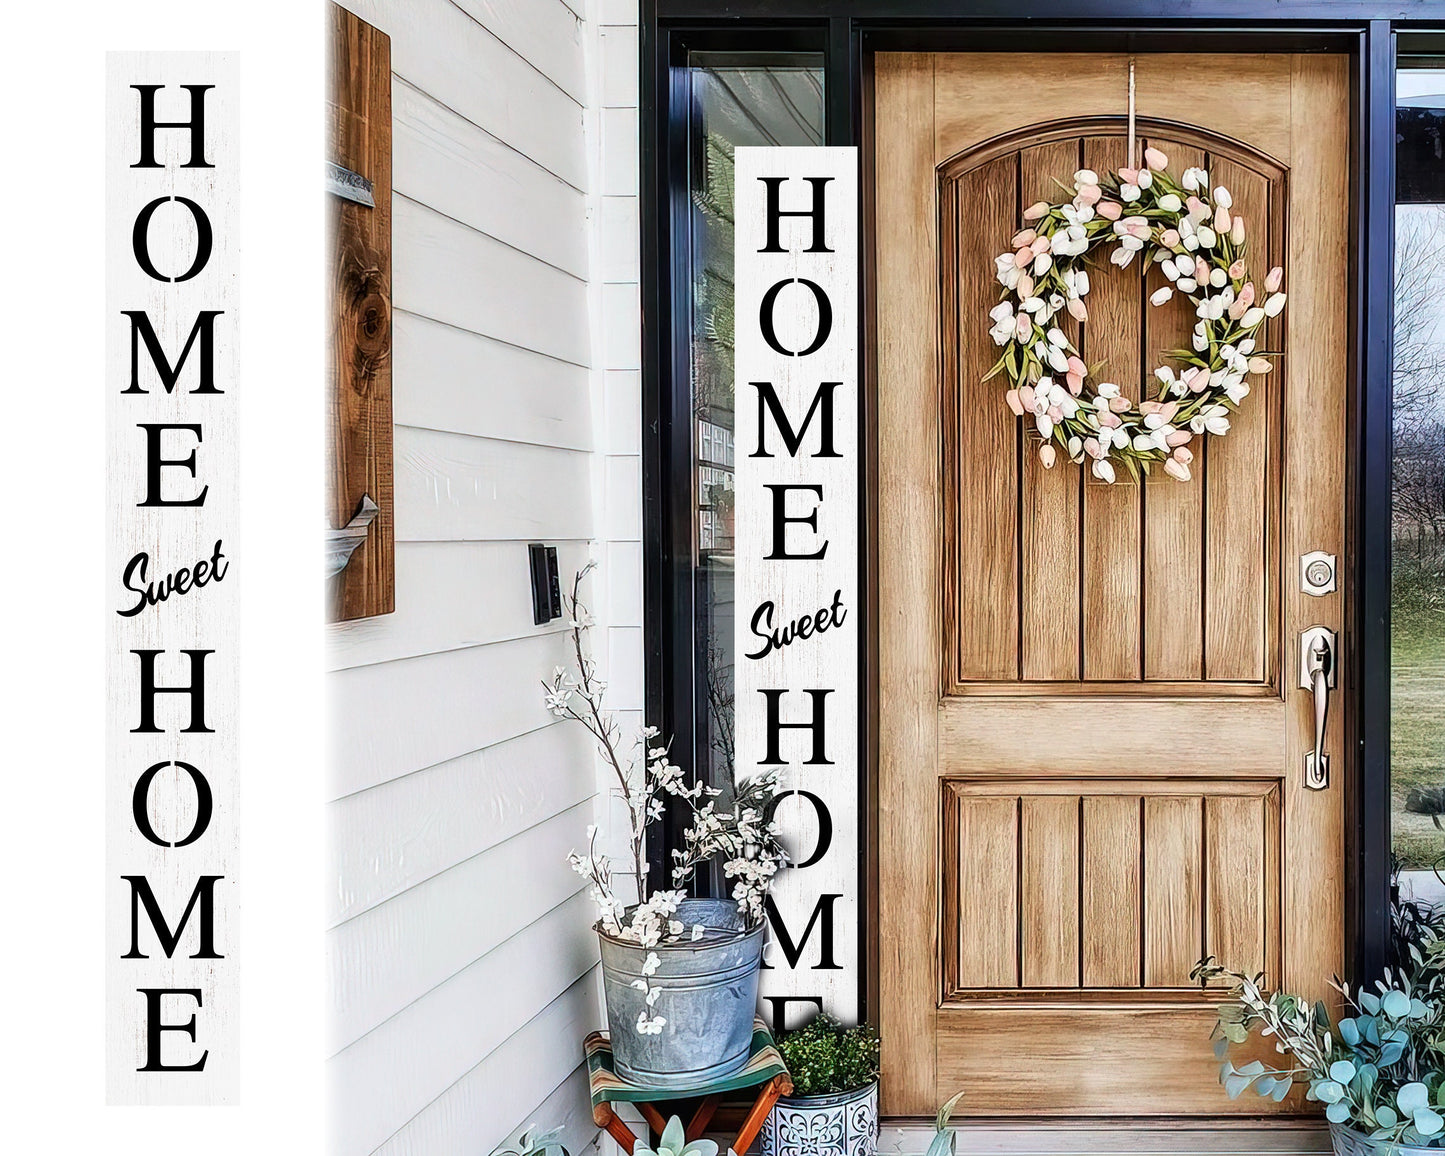 72in White Home Sweet Home Sign | Rustic Wood Front Door Decor | Farmhouse Porch Sign Decorations | Patio Decor | Wooden Decor